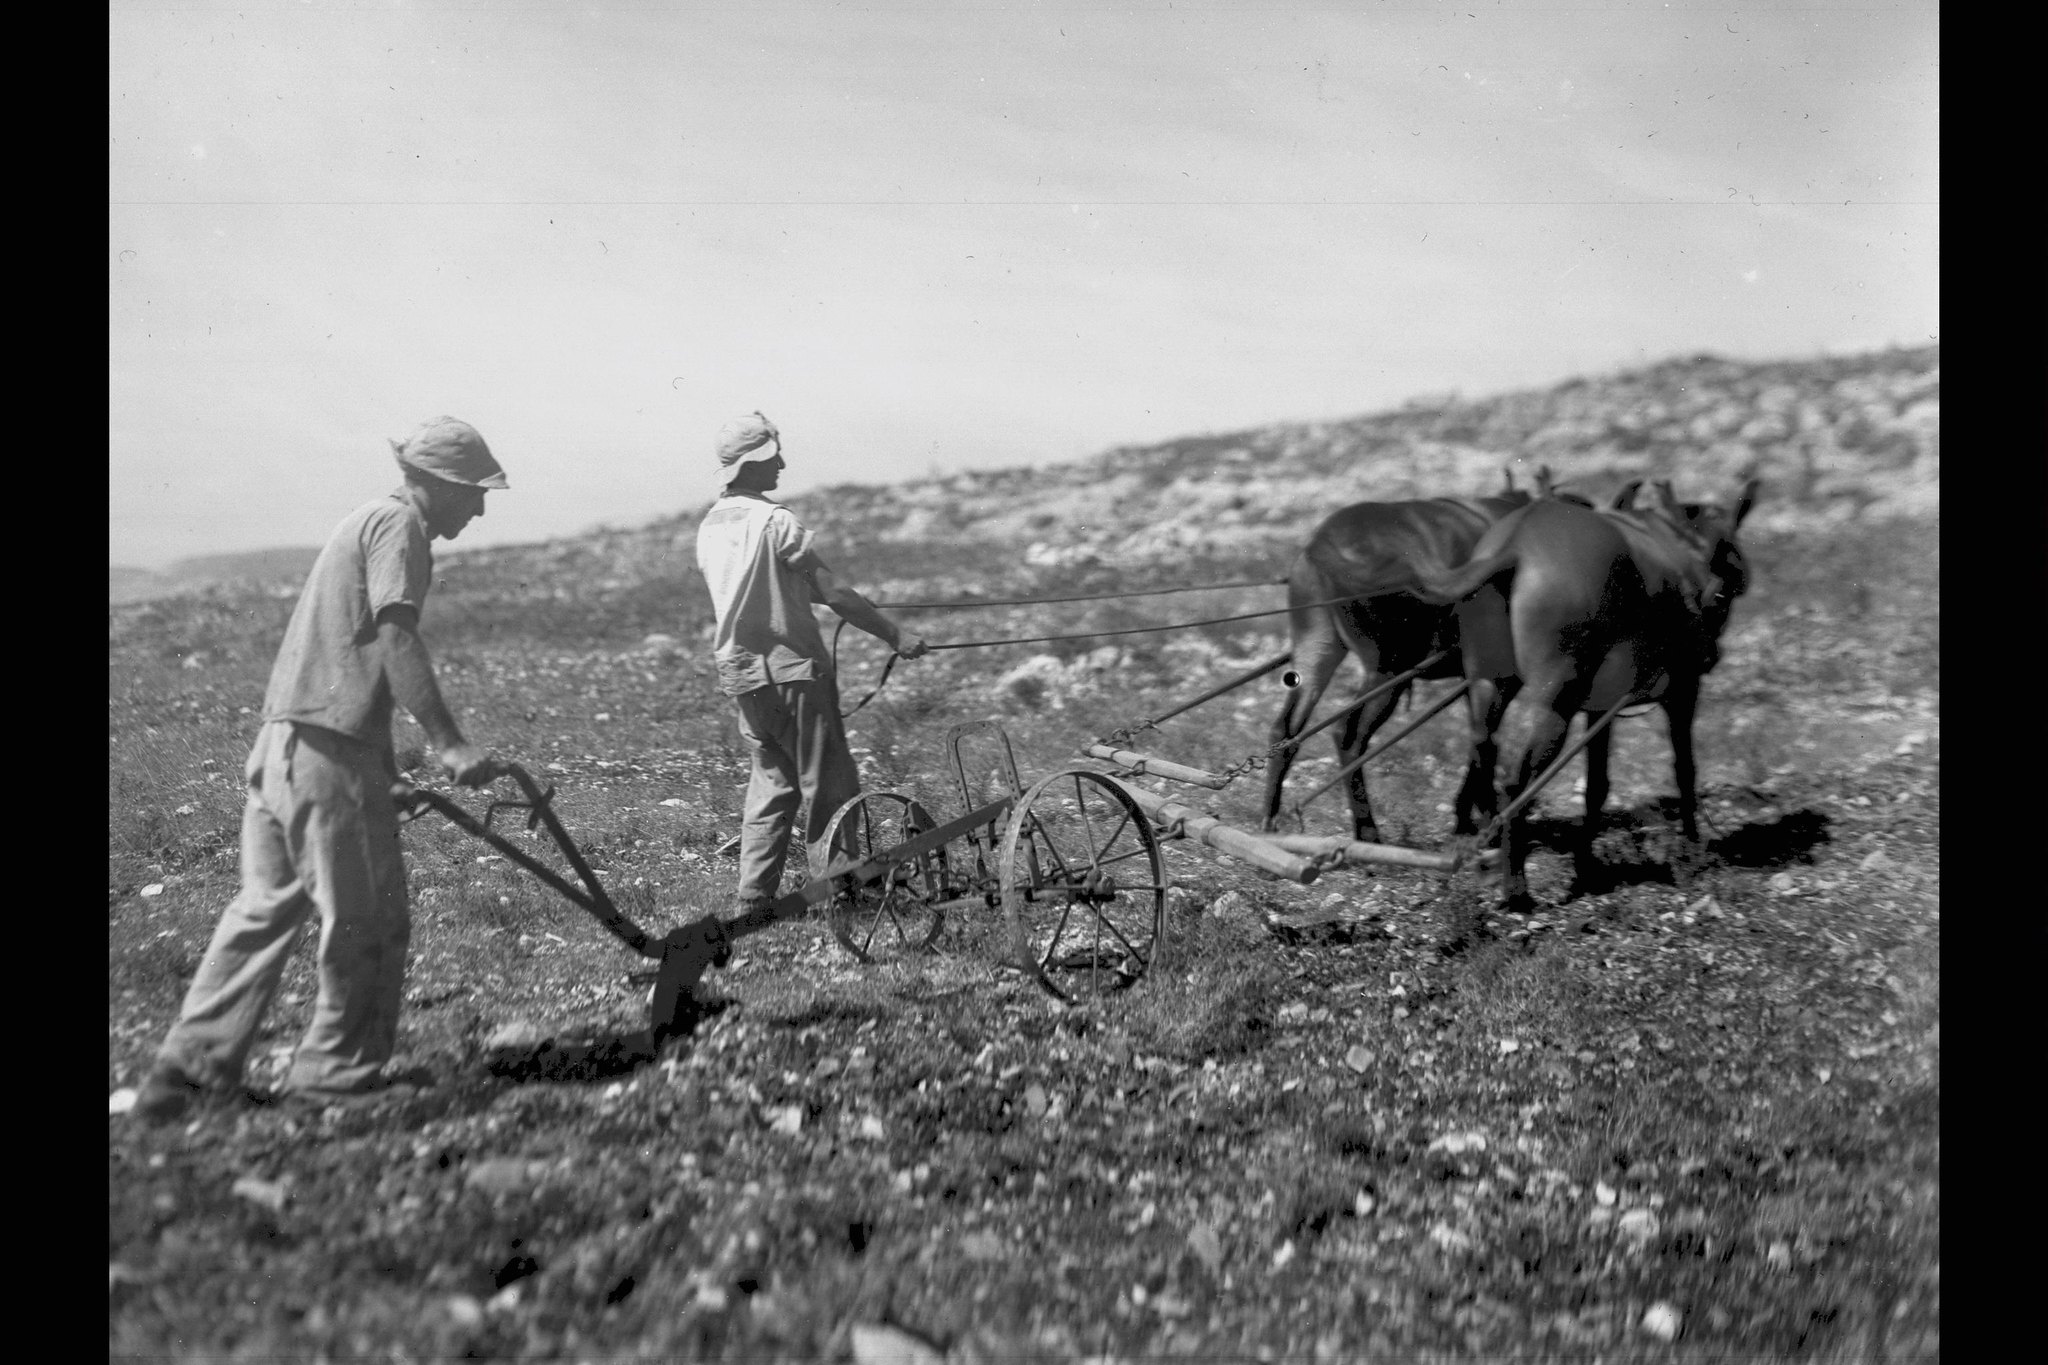 Members of Kibbutz Ma’ale Hahamisha plow their land in 1938. Zoltan Kluger/Government Press Office.
